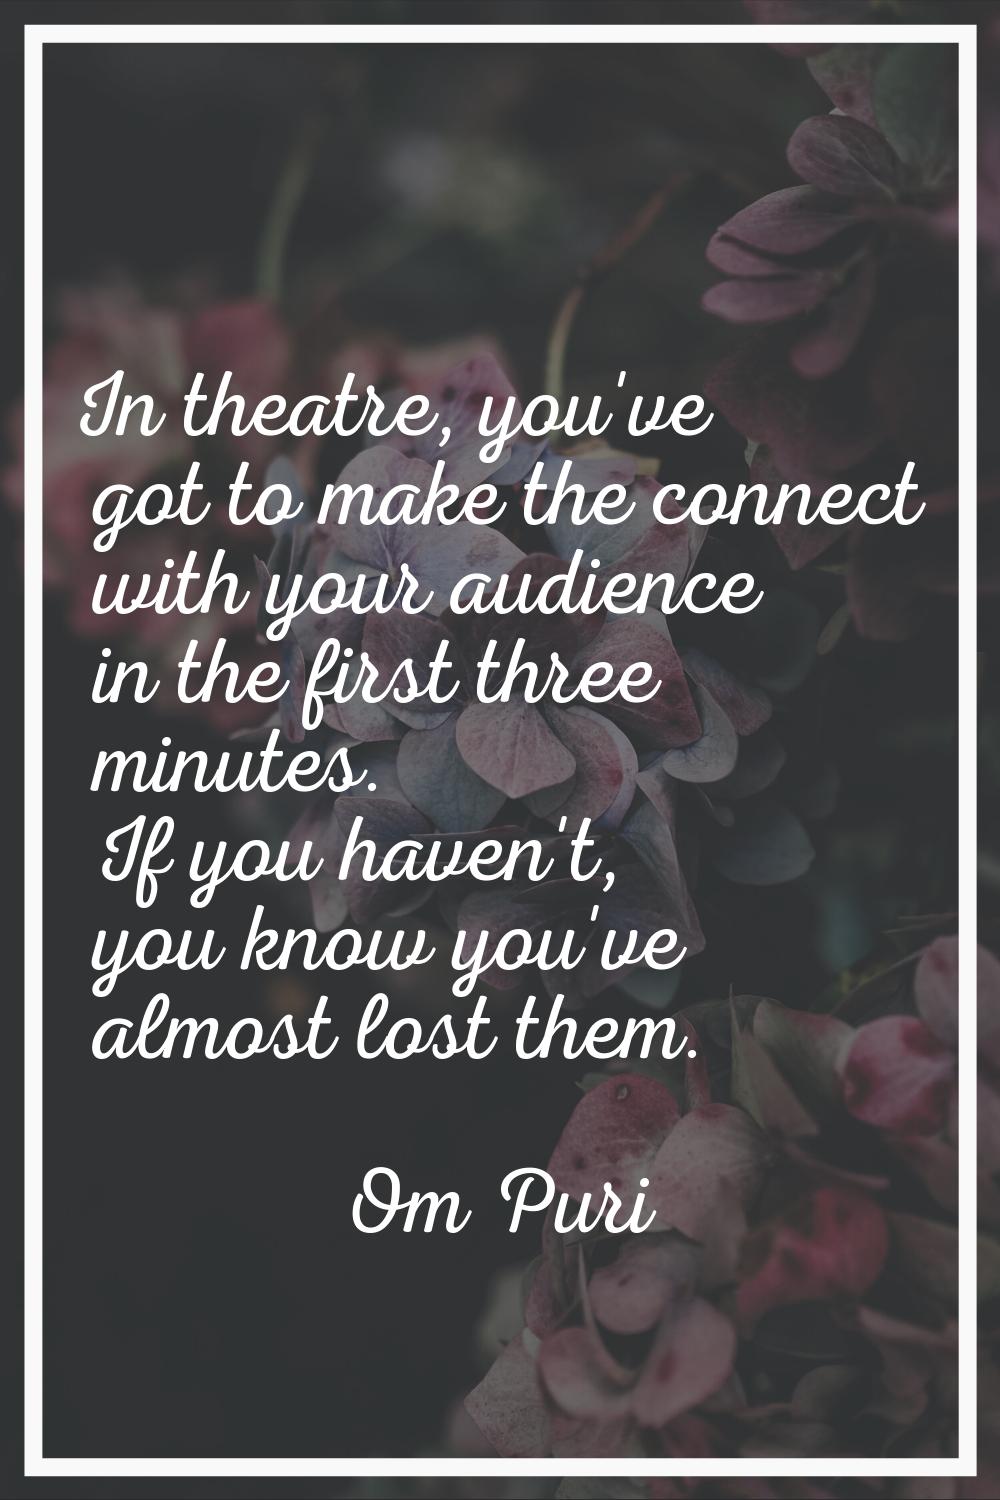 In theatre, you've got to make the connect with your audience in the first three minutes. If you ha